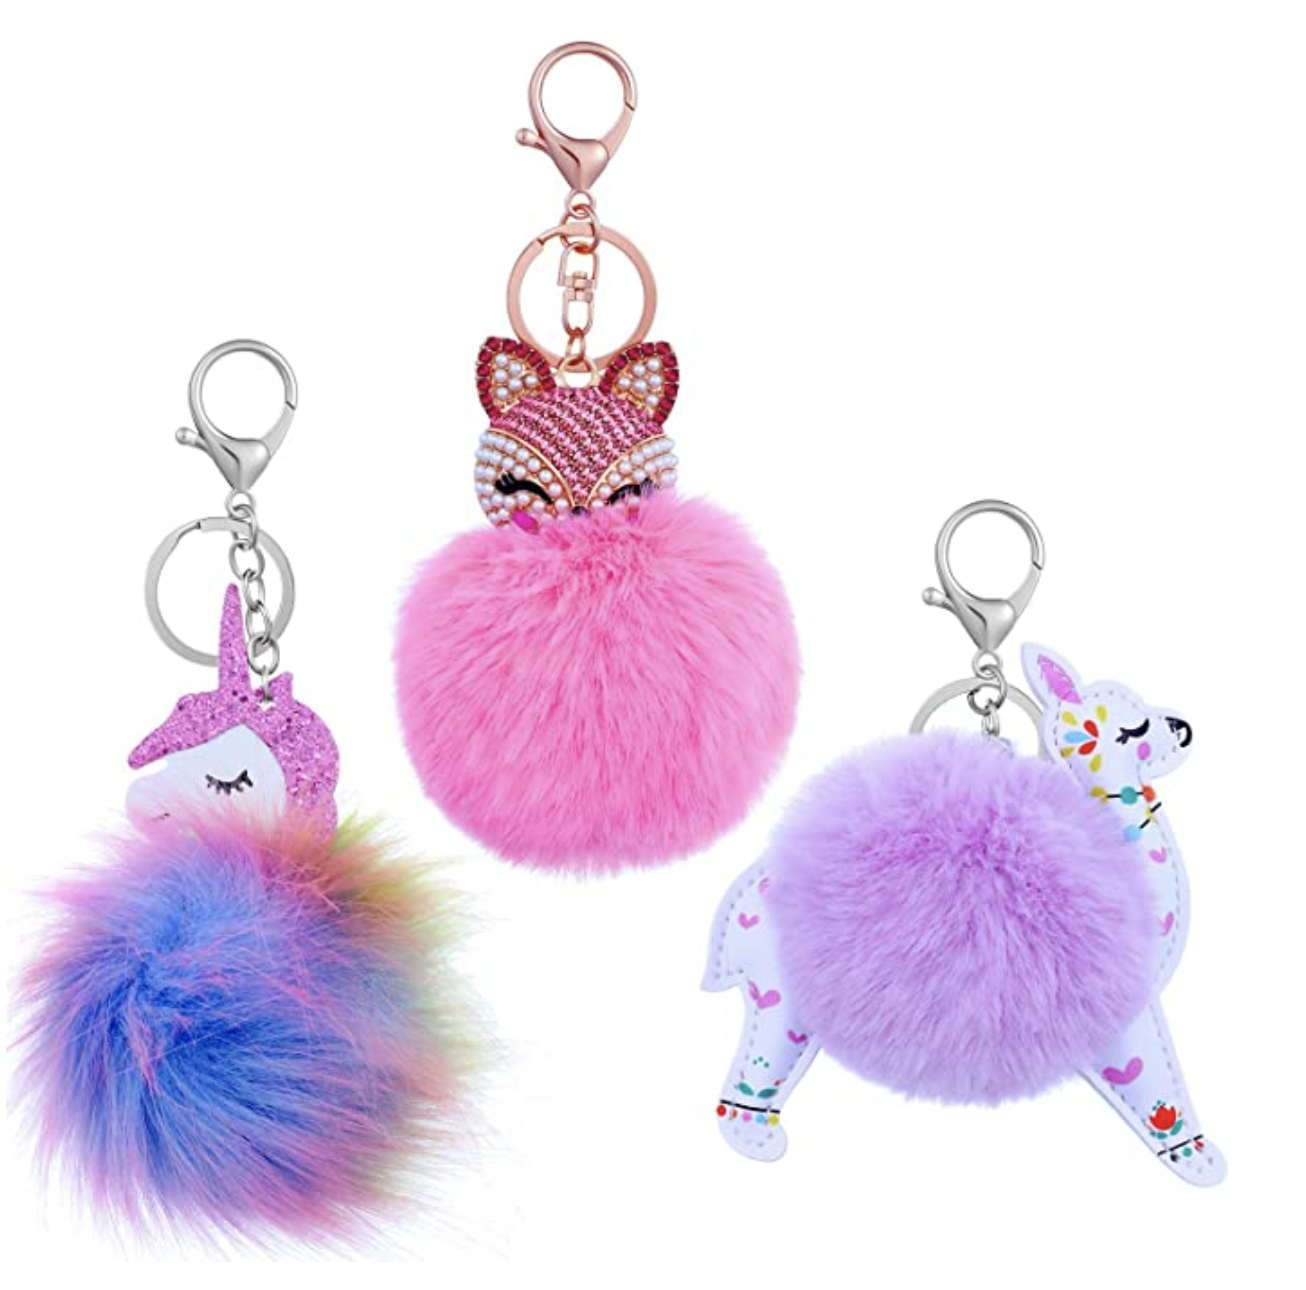 gifts-for-8-year-old-girls-keychain